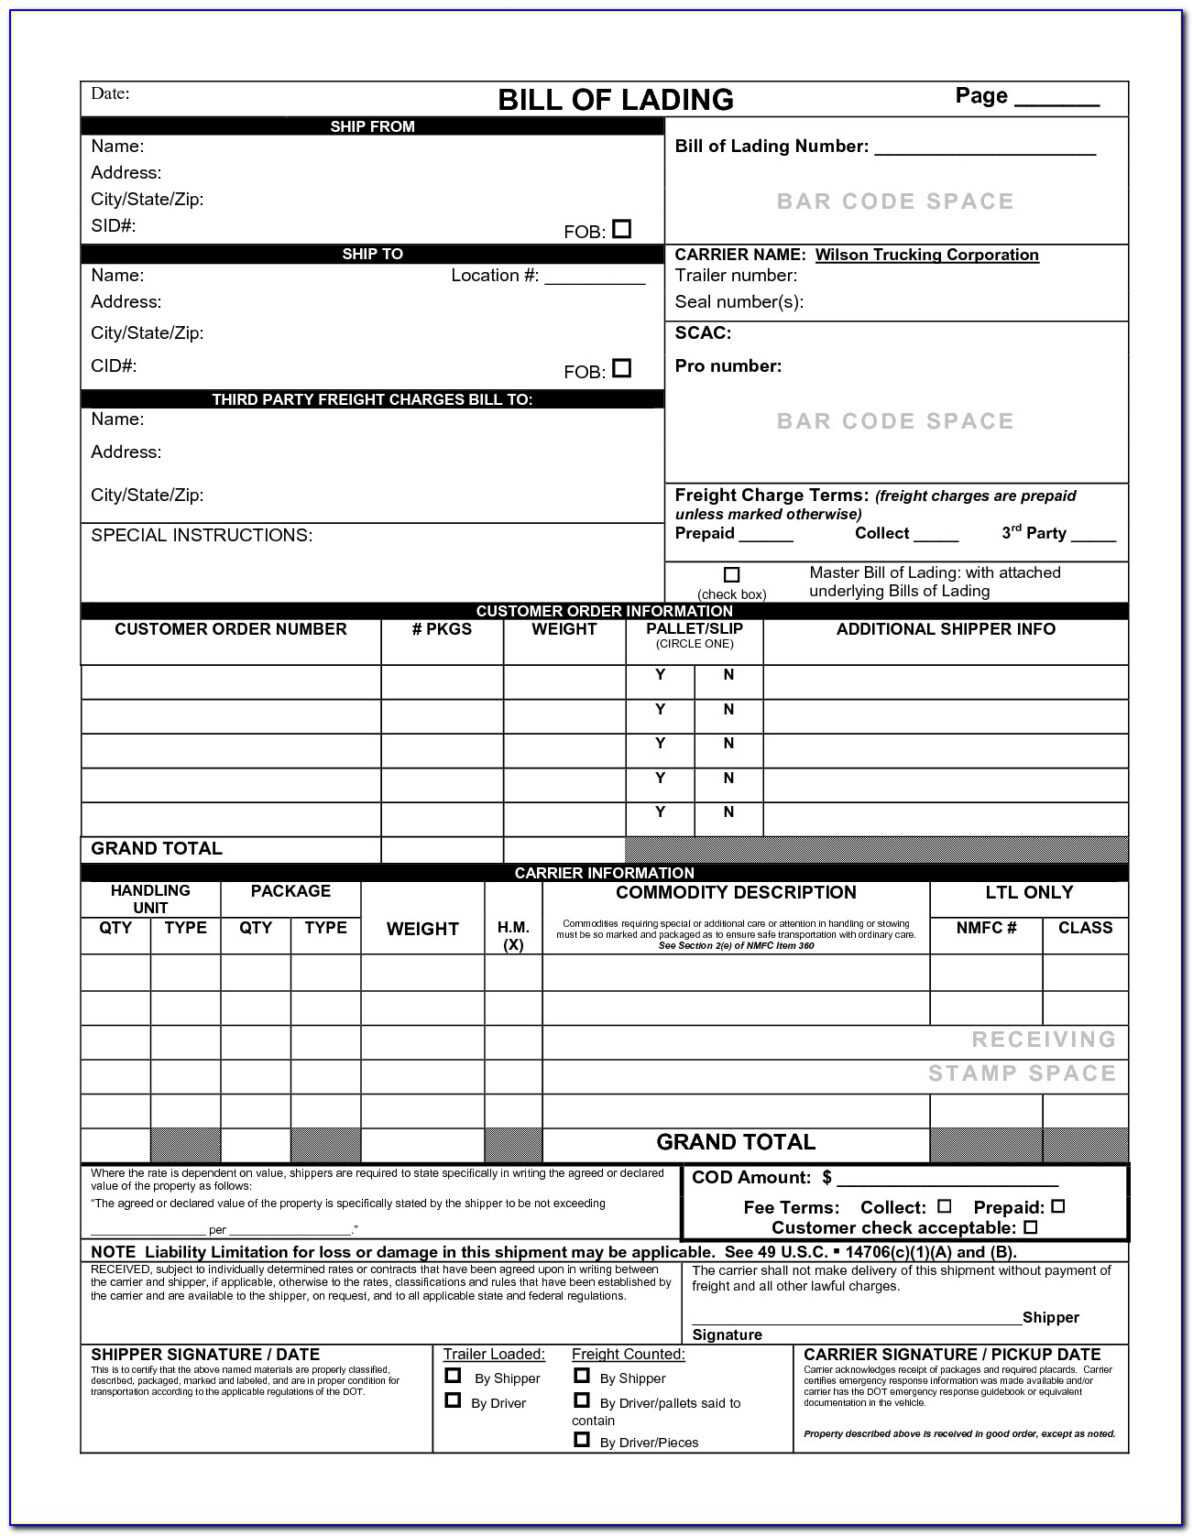 How To Fill Out A Straight Bill Of Lading Short Form